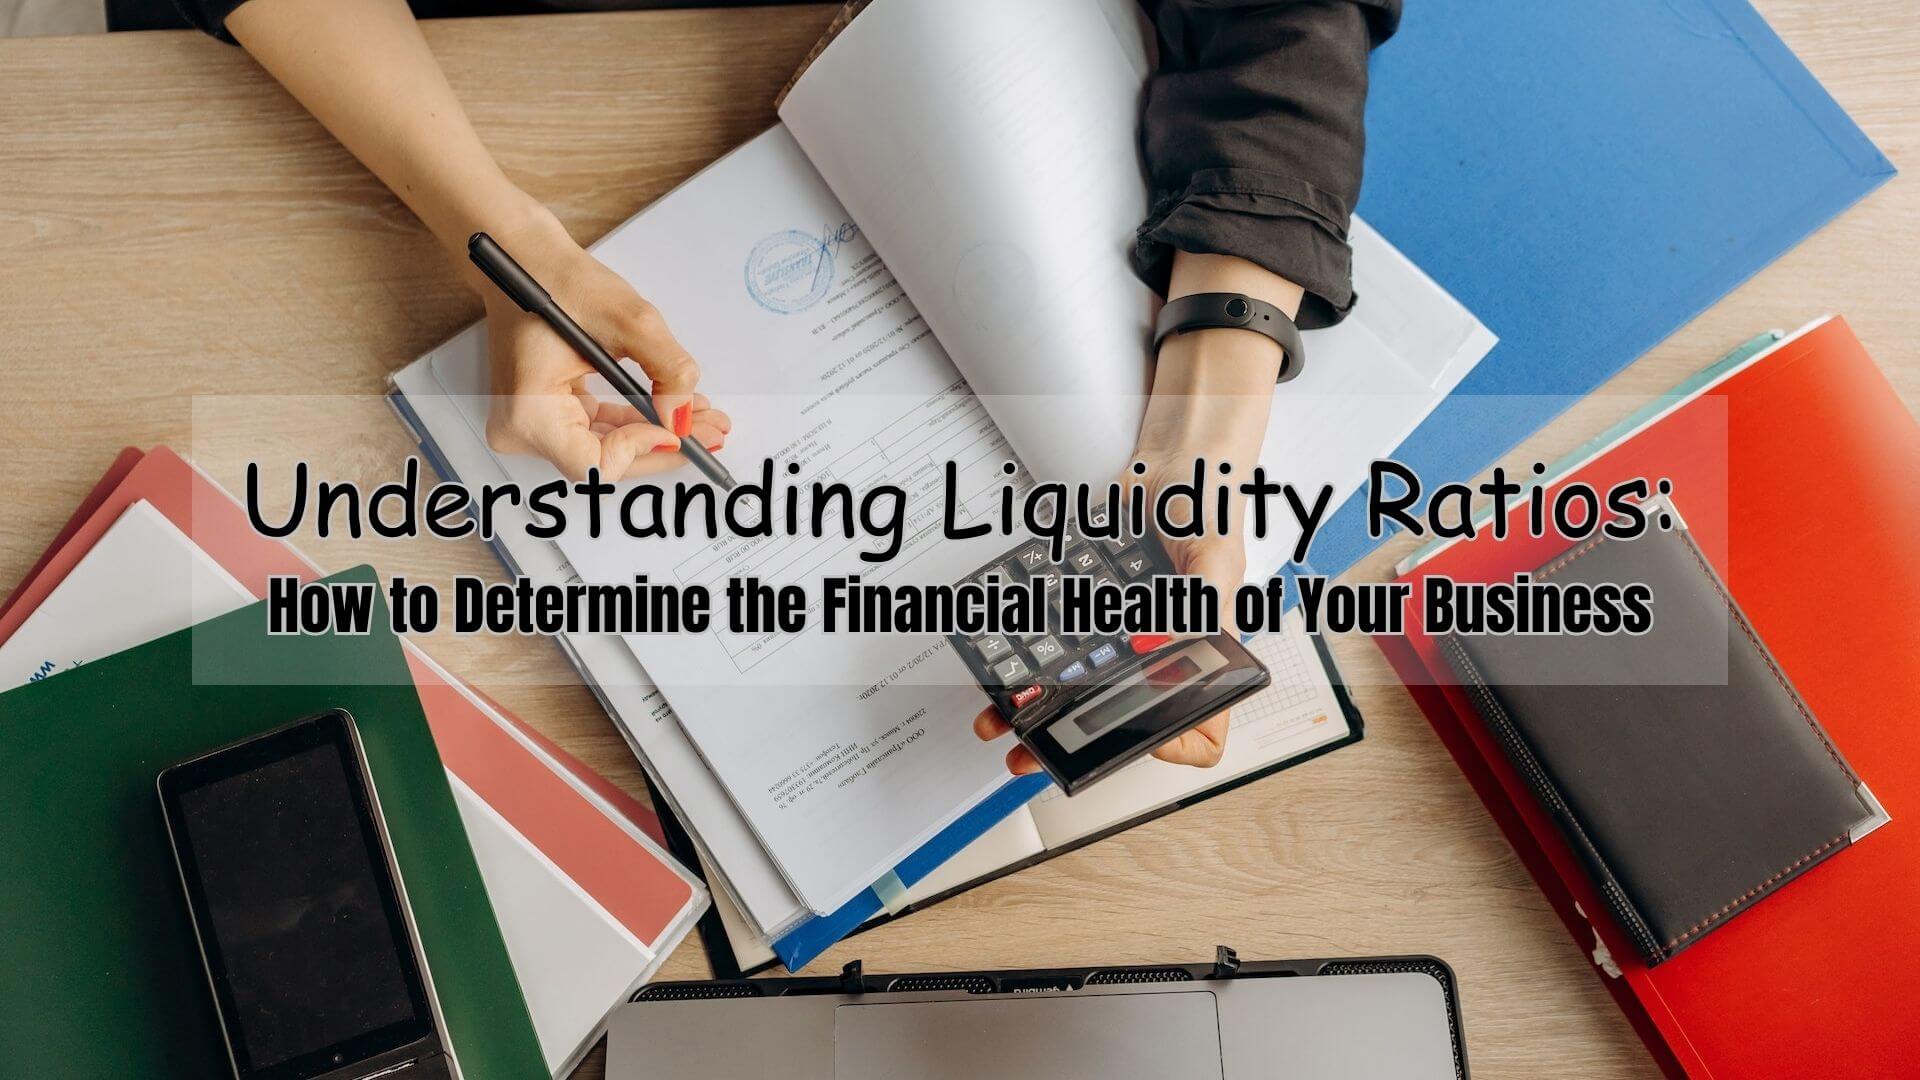 What Does A Liquidity Ratio Measure?